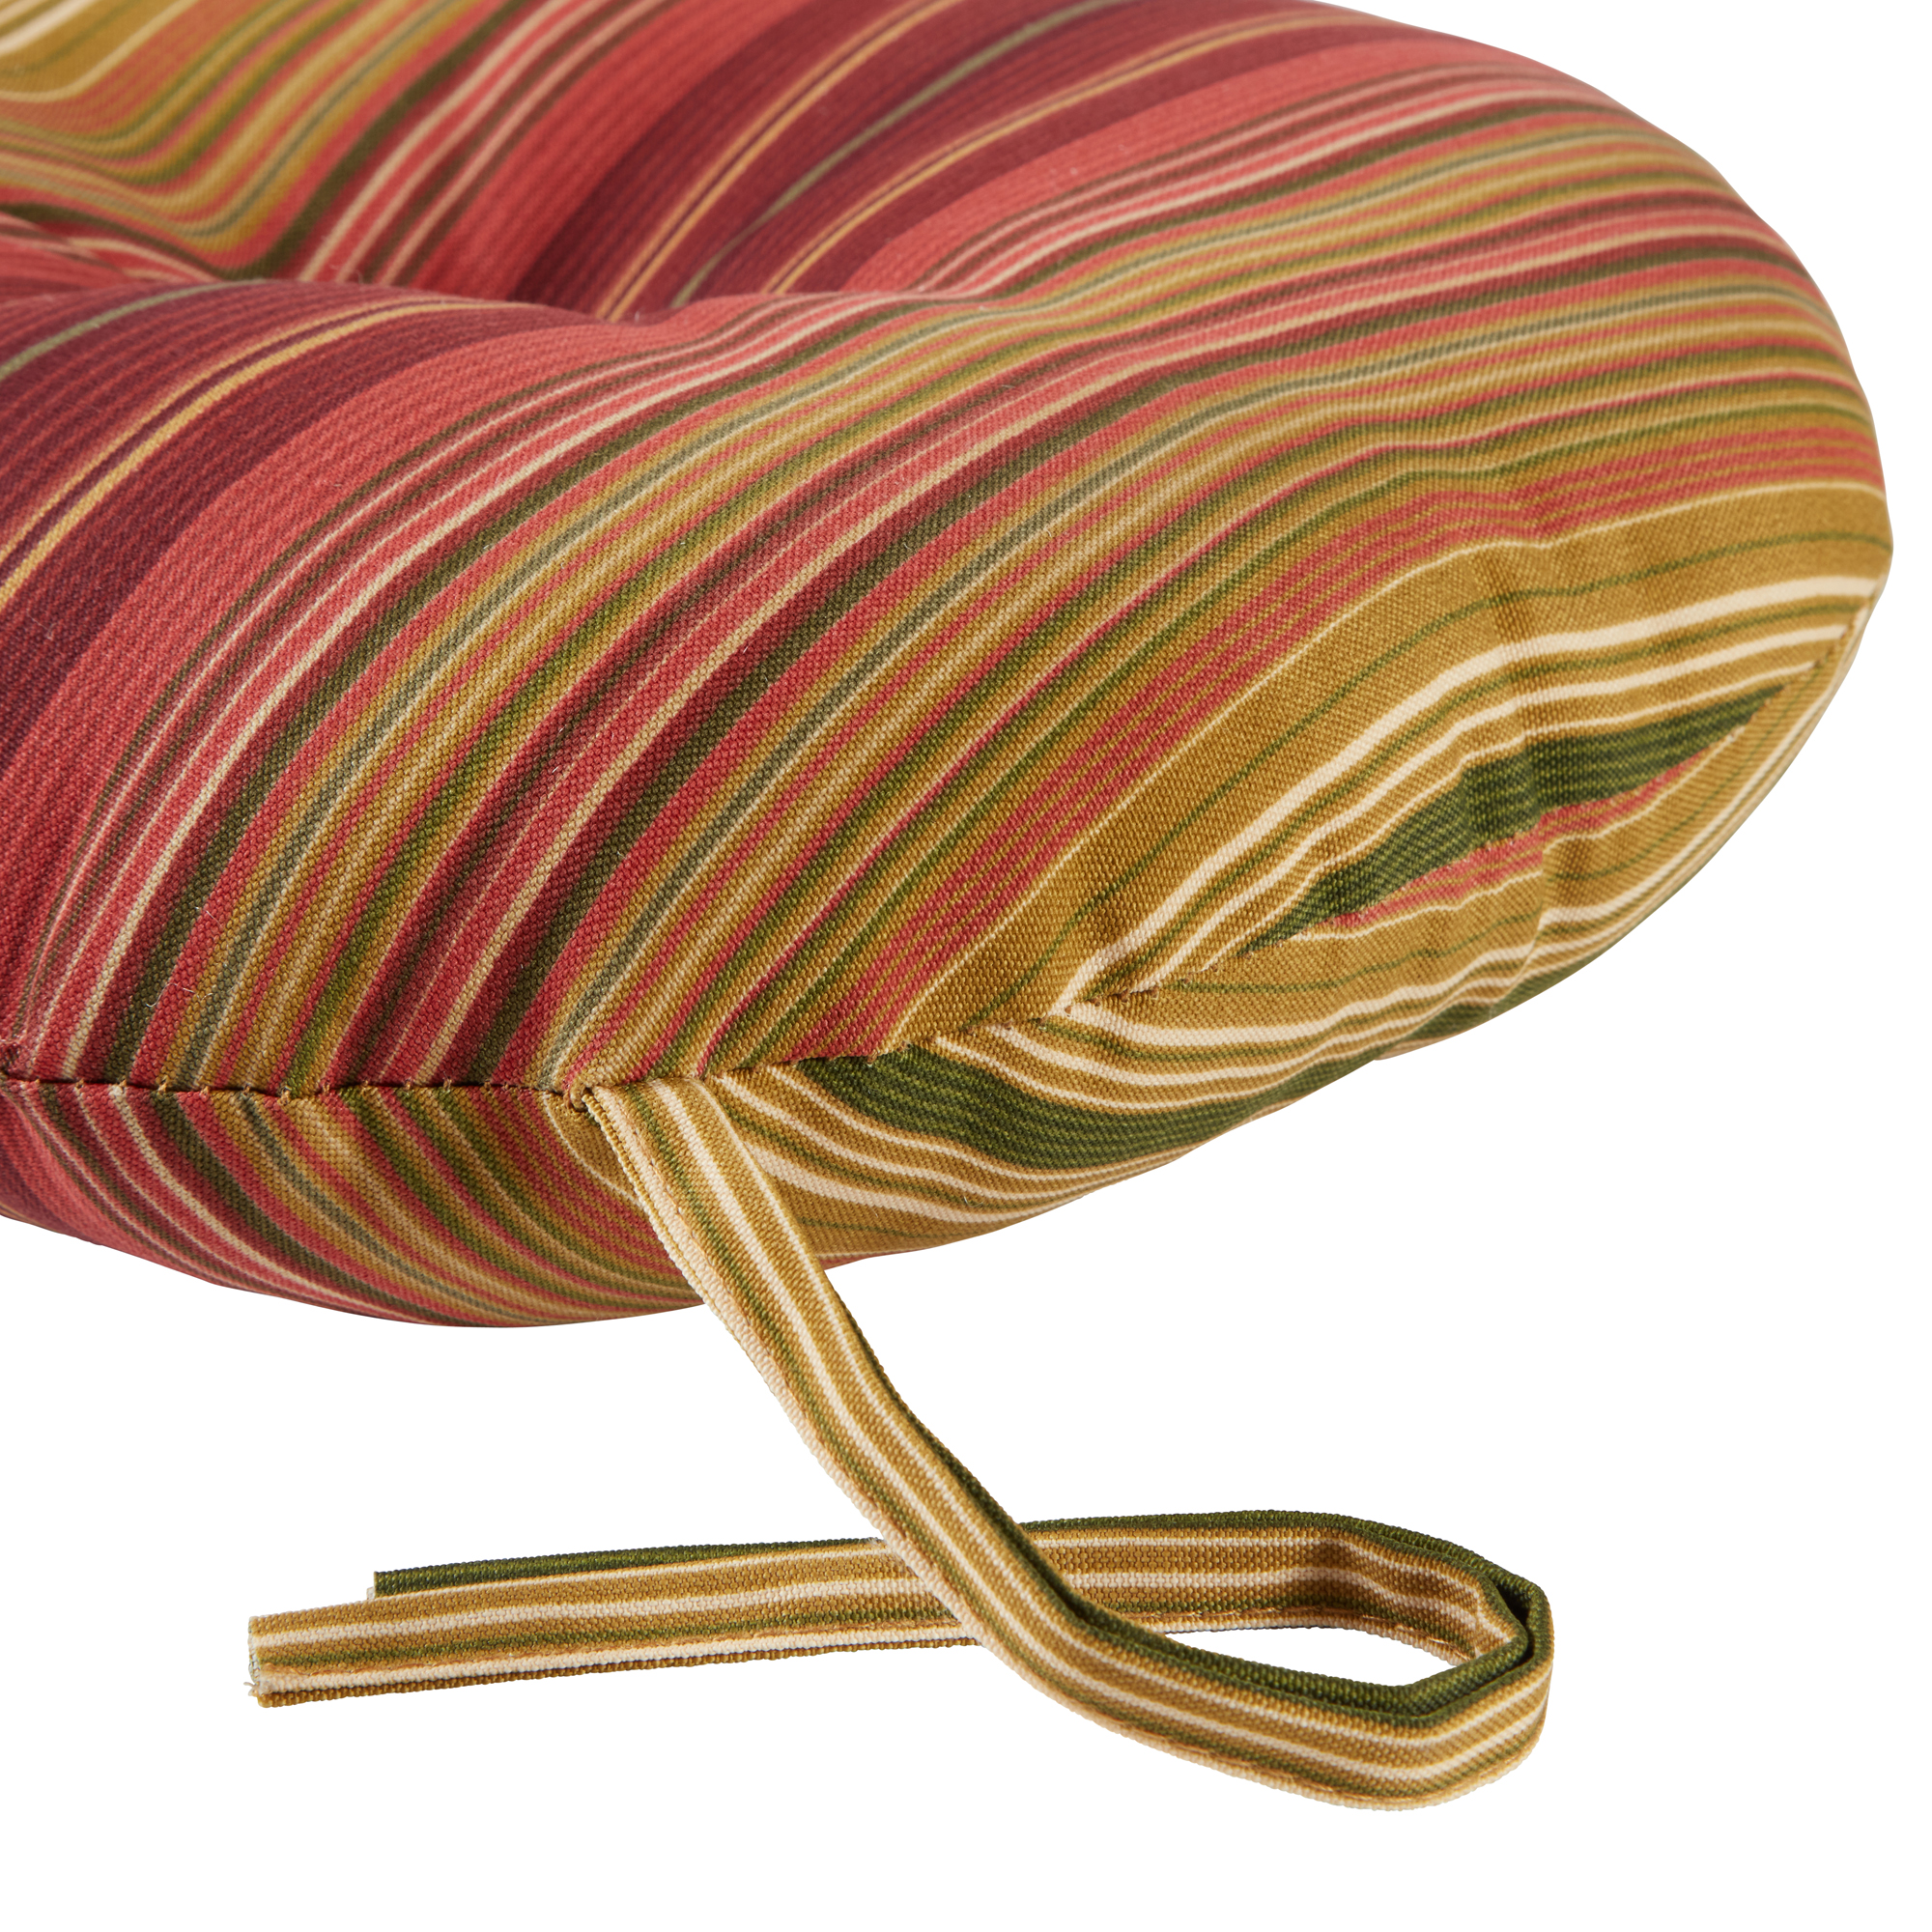 Greendale Home Fashions Kinnabari Stripe 15 in. Round Outdoor Reversible Bistro Seat Cushion (Set of 2) - image 4 of 6